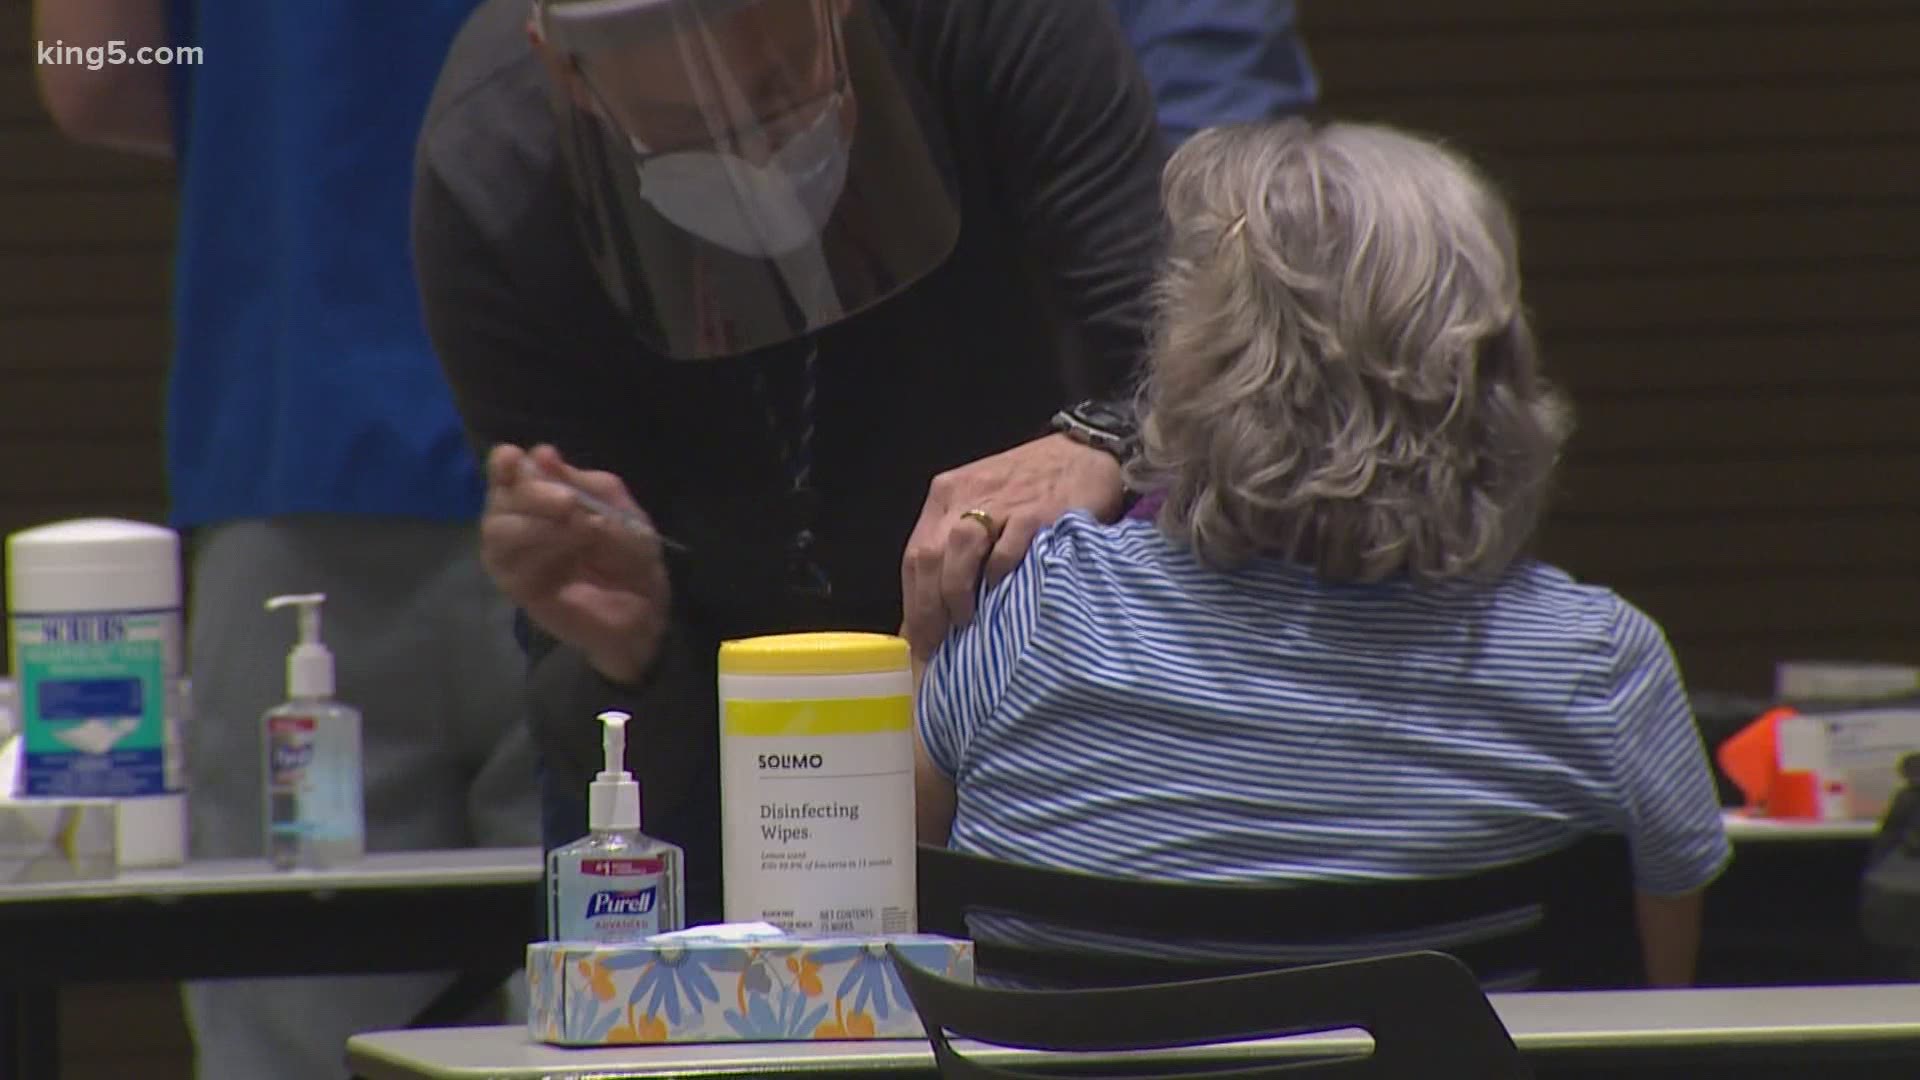 Health officials answered questions on teacher vaccinations and distributions to counties.